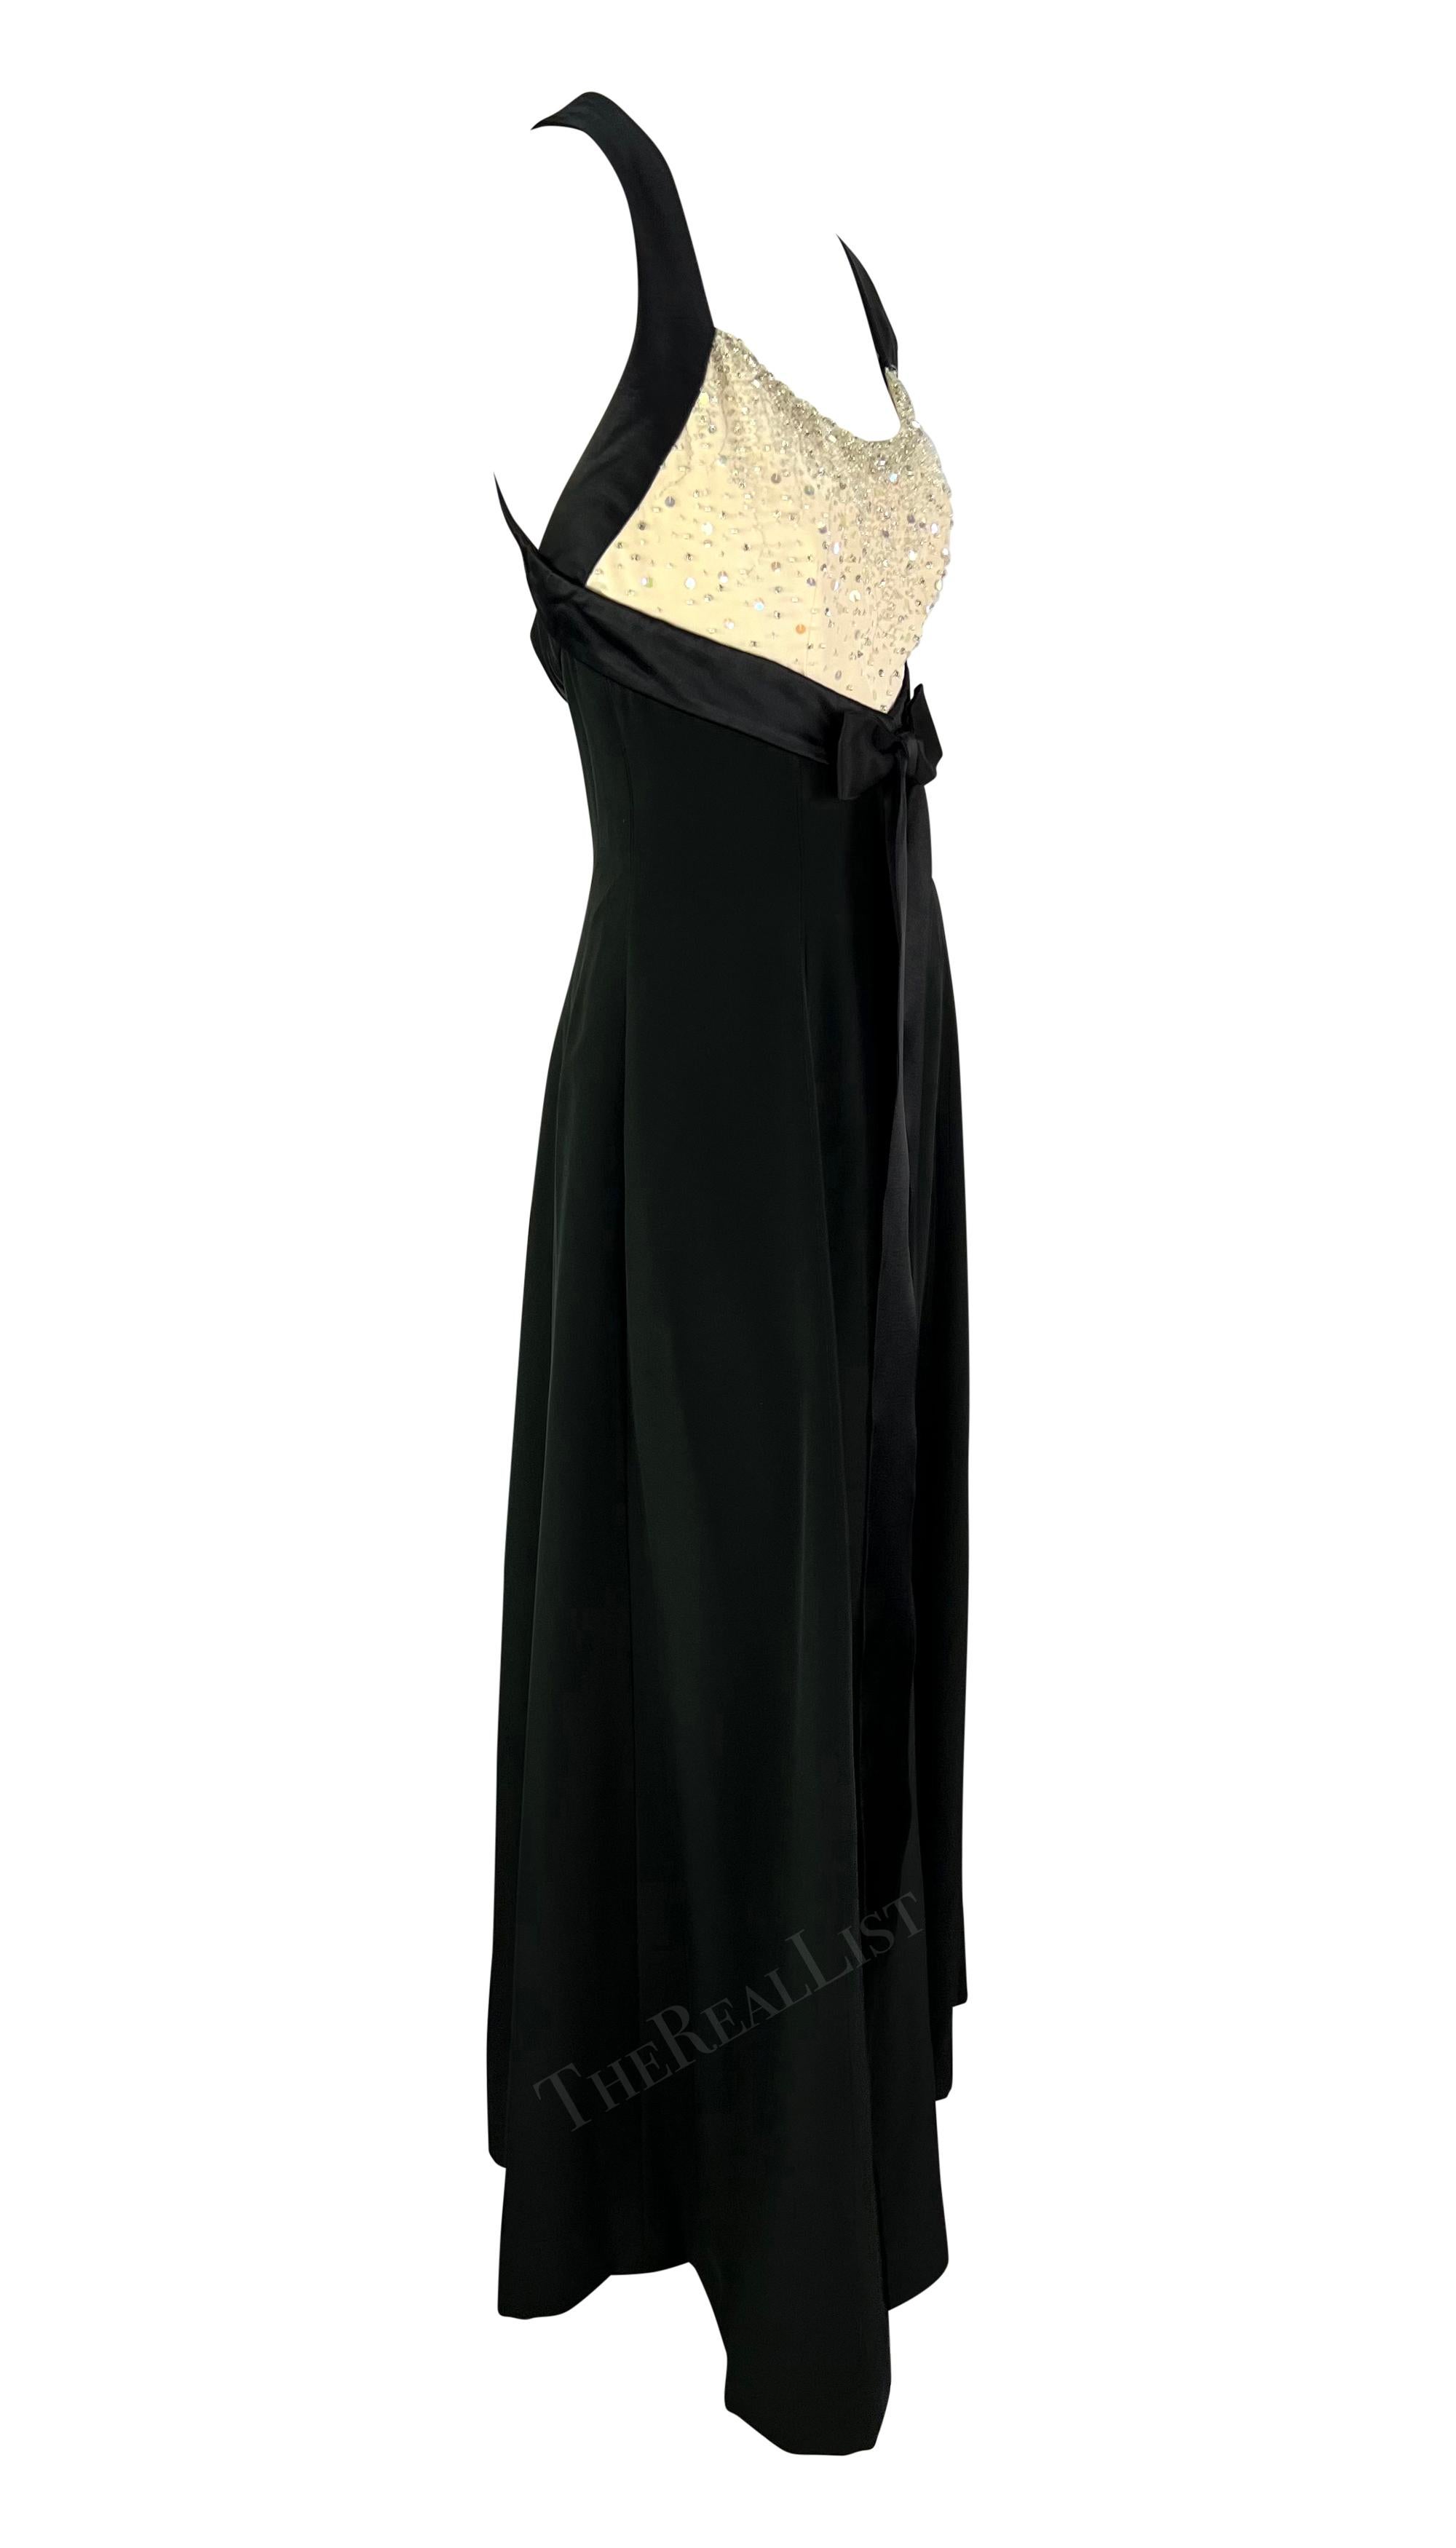 S/S 1995 Jacques Fath Runway Black White Beaded Ribbon Gown For Sale 4